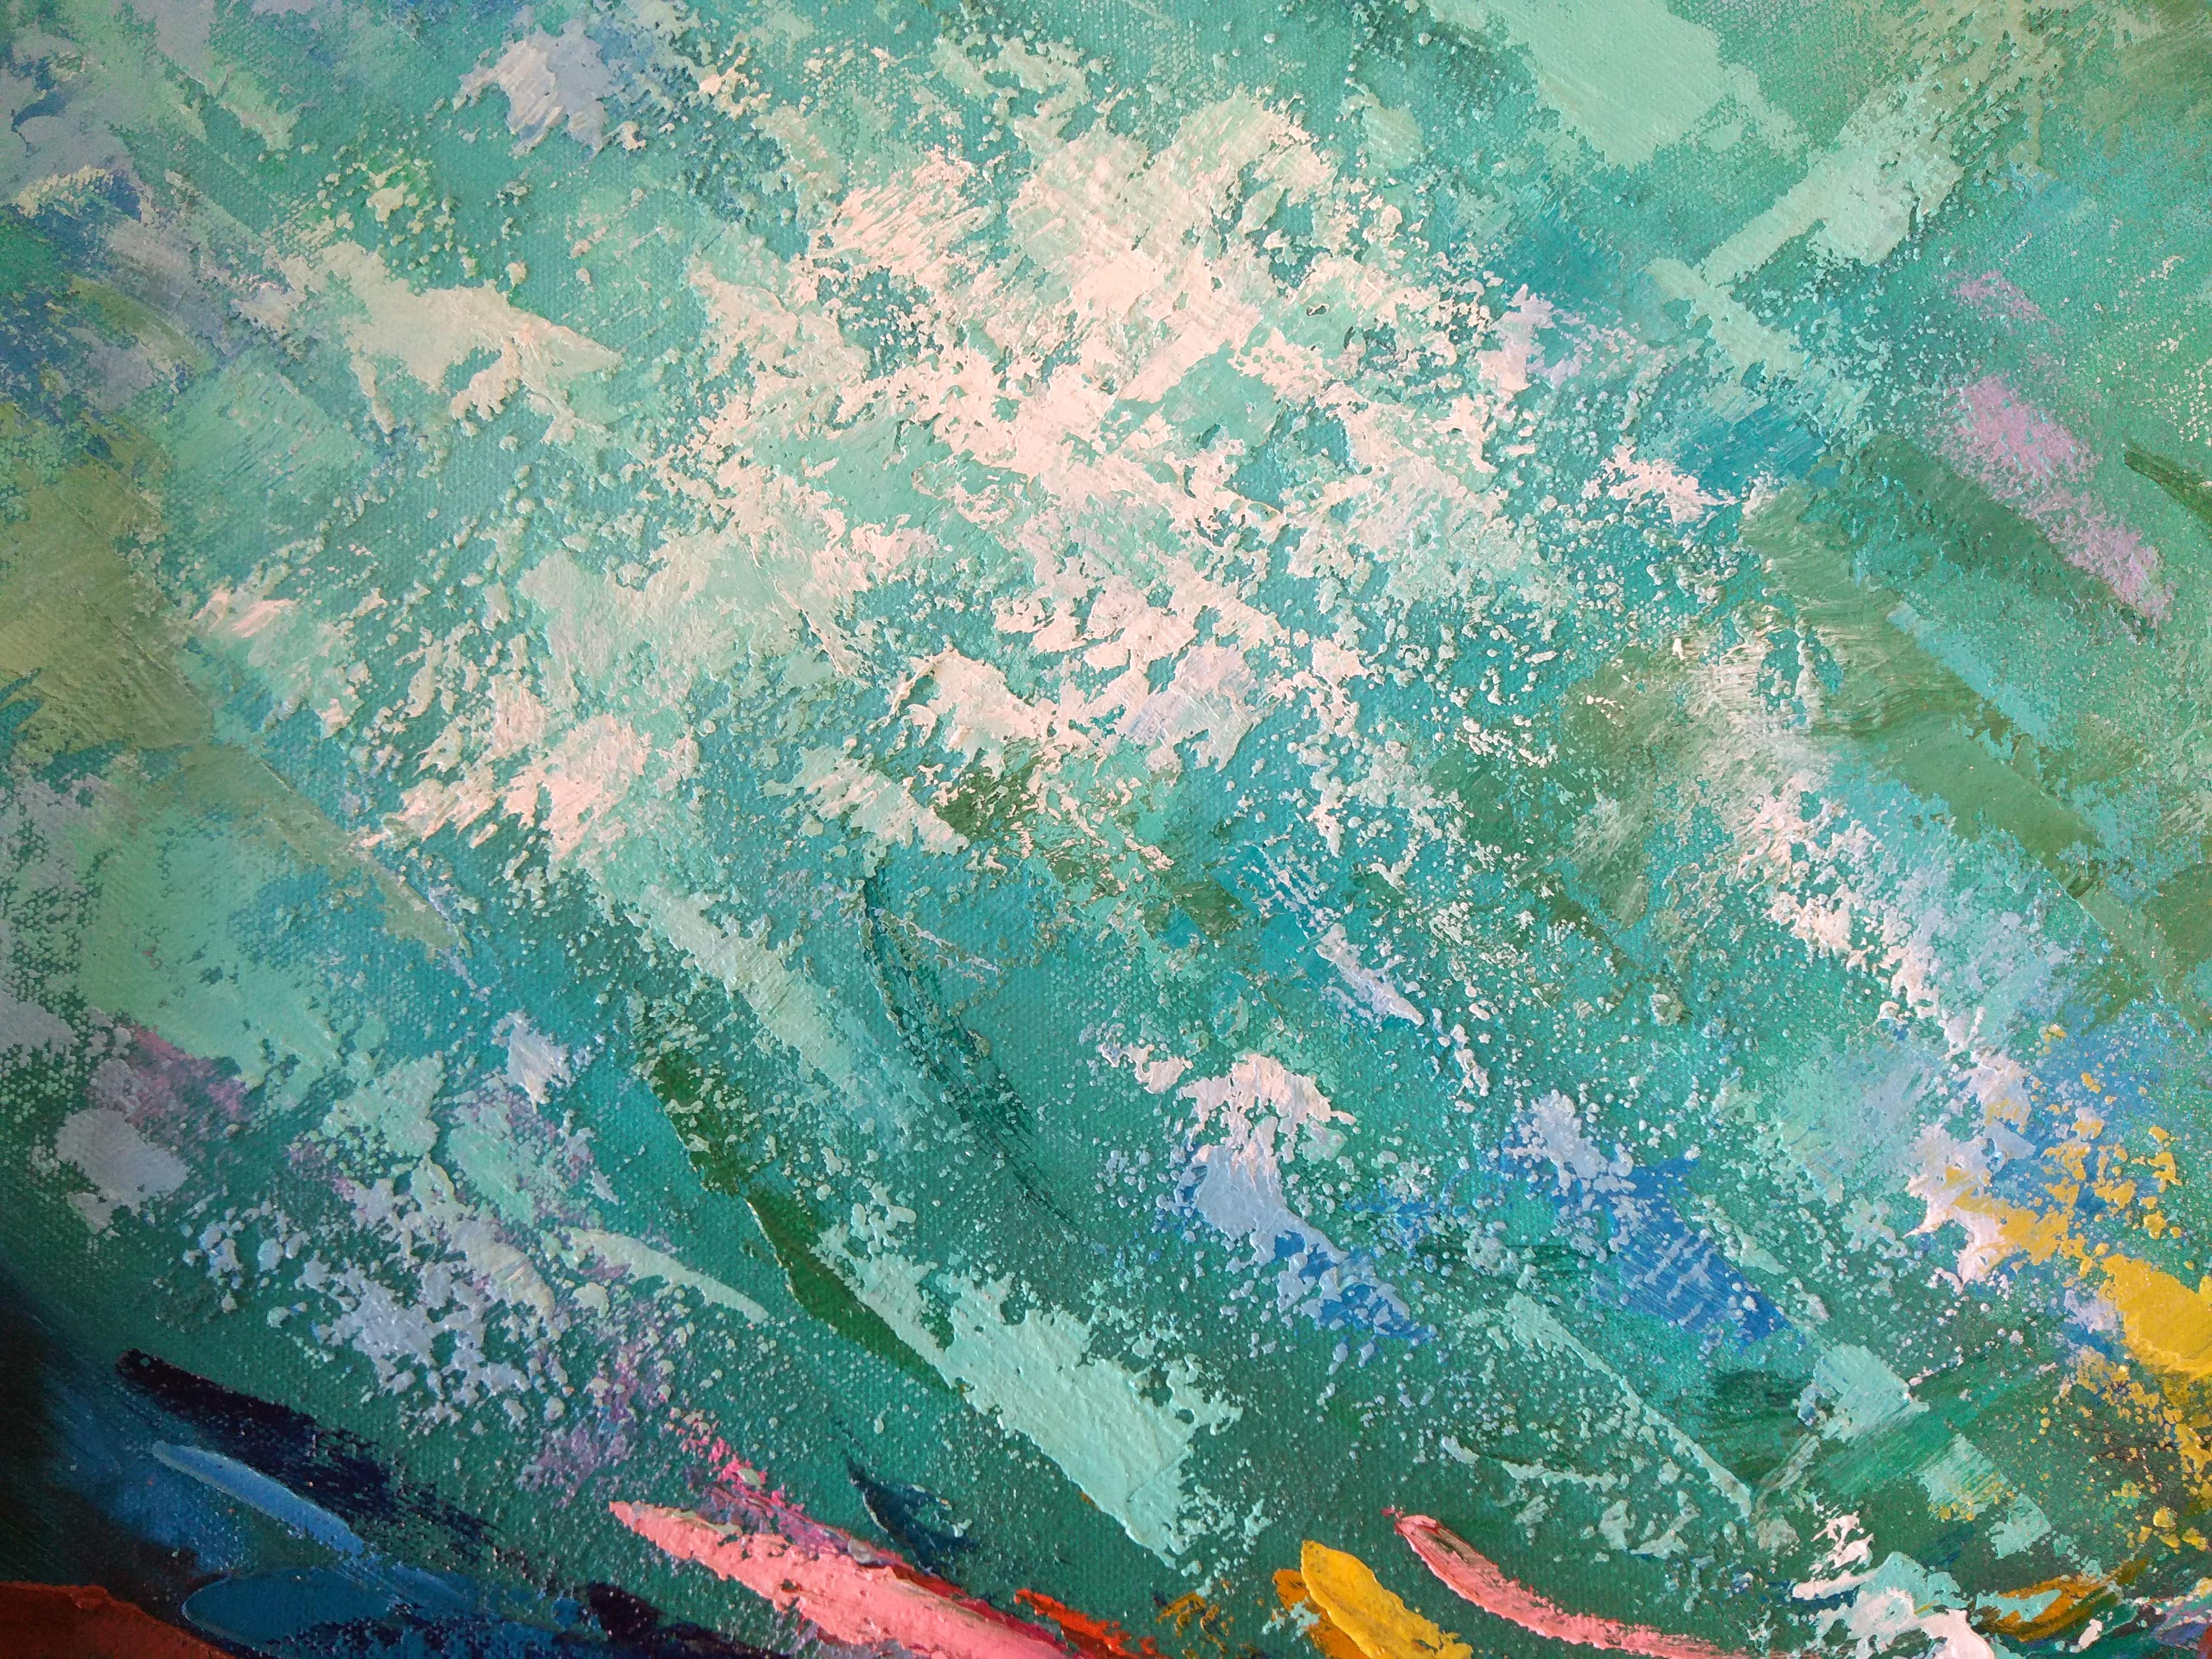 Abstract Fish Painting Seascape Ocean Art 8